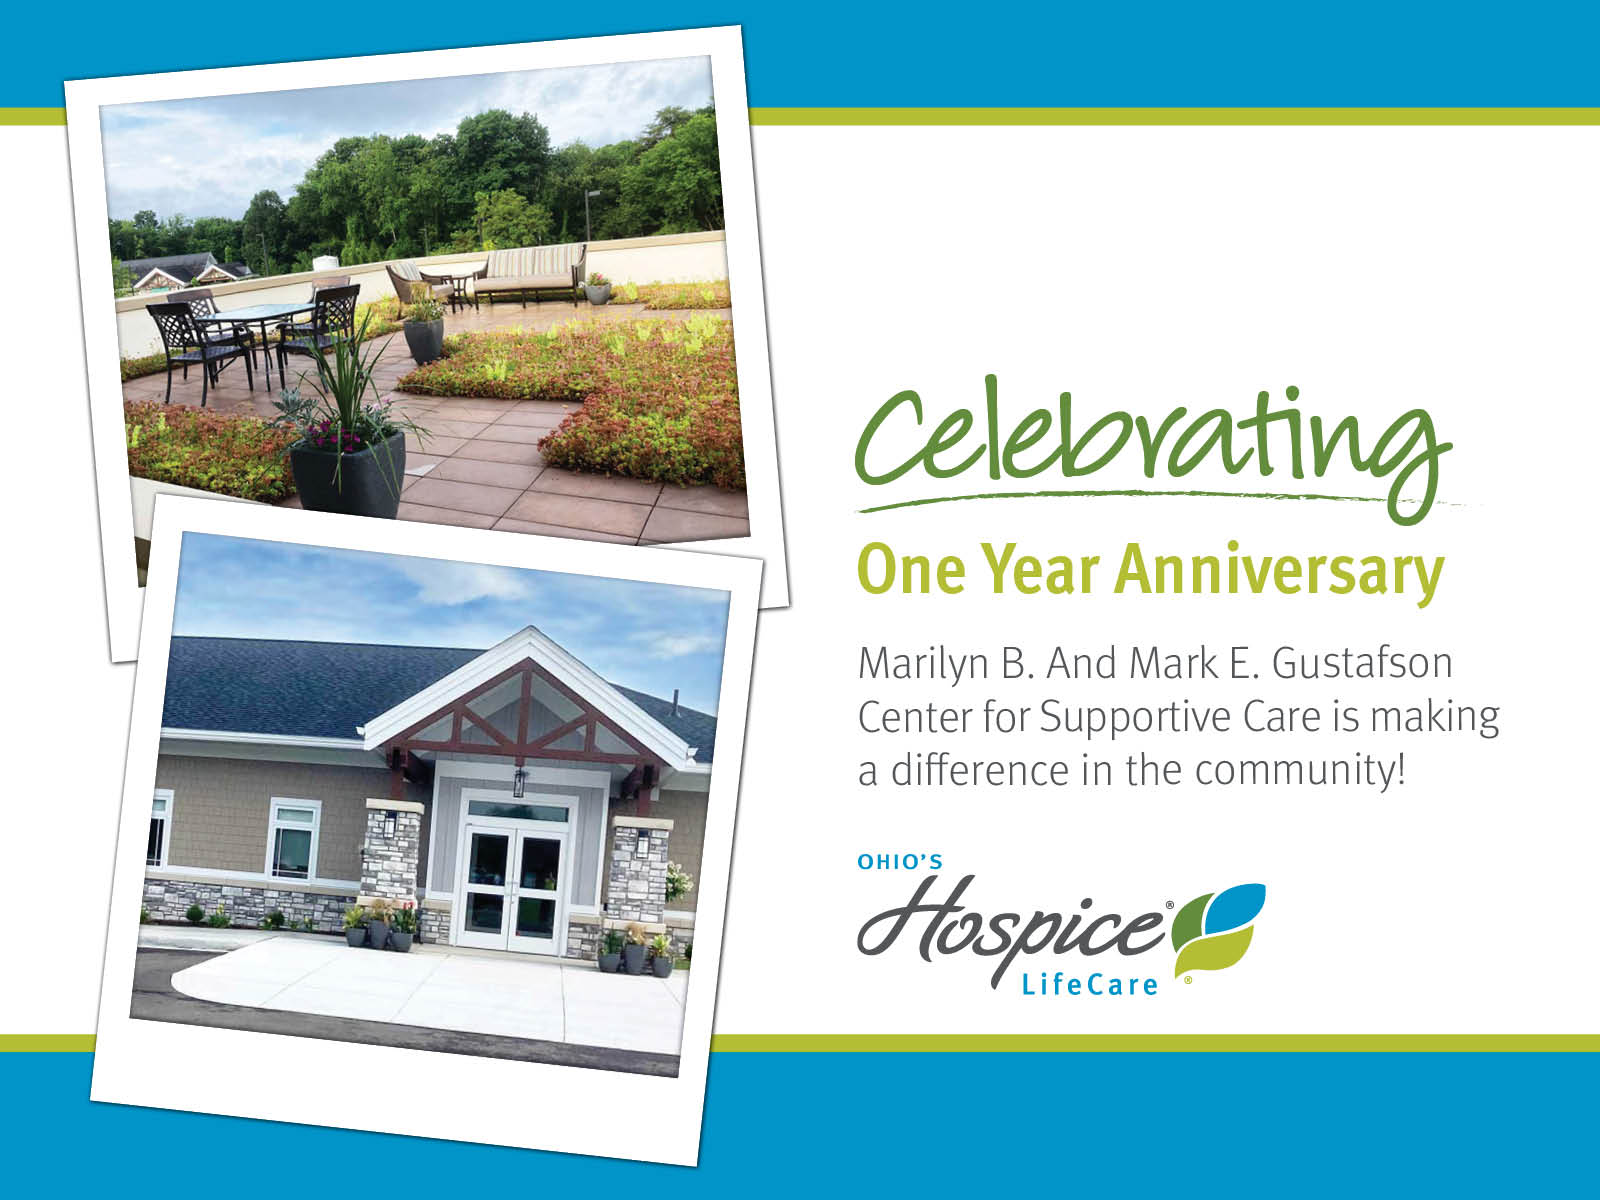 Celebrating One Year Anniversary. Marilyn B And Mark E. Gustafson Center for Supportive Care is making a difference in the community! Ohio's Hospice LifeCare